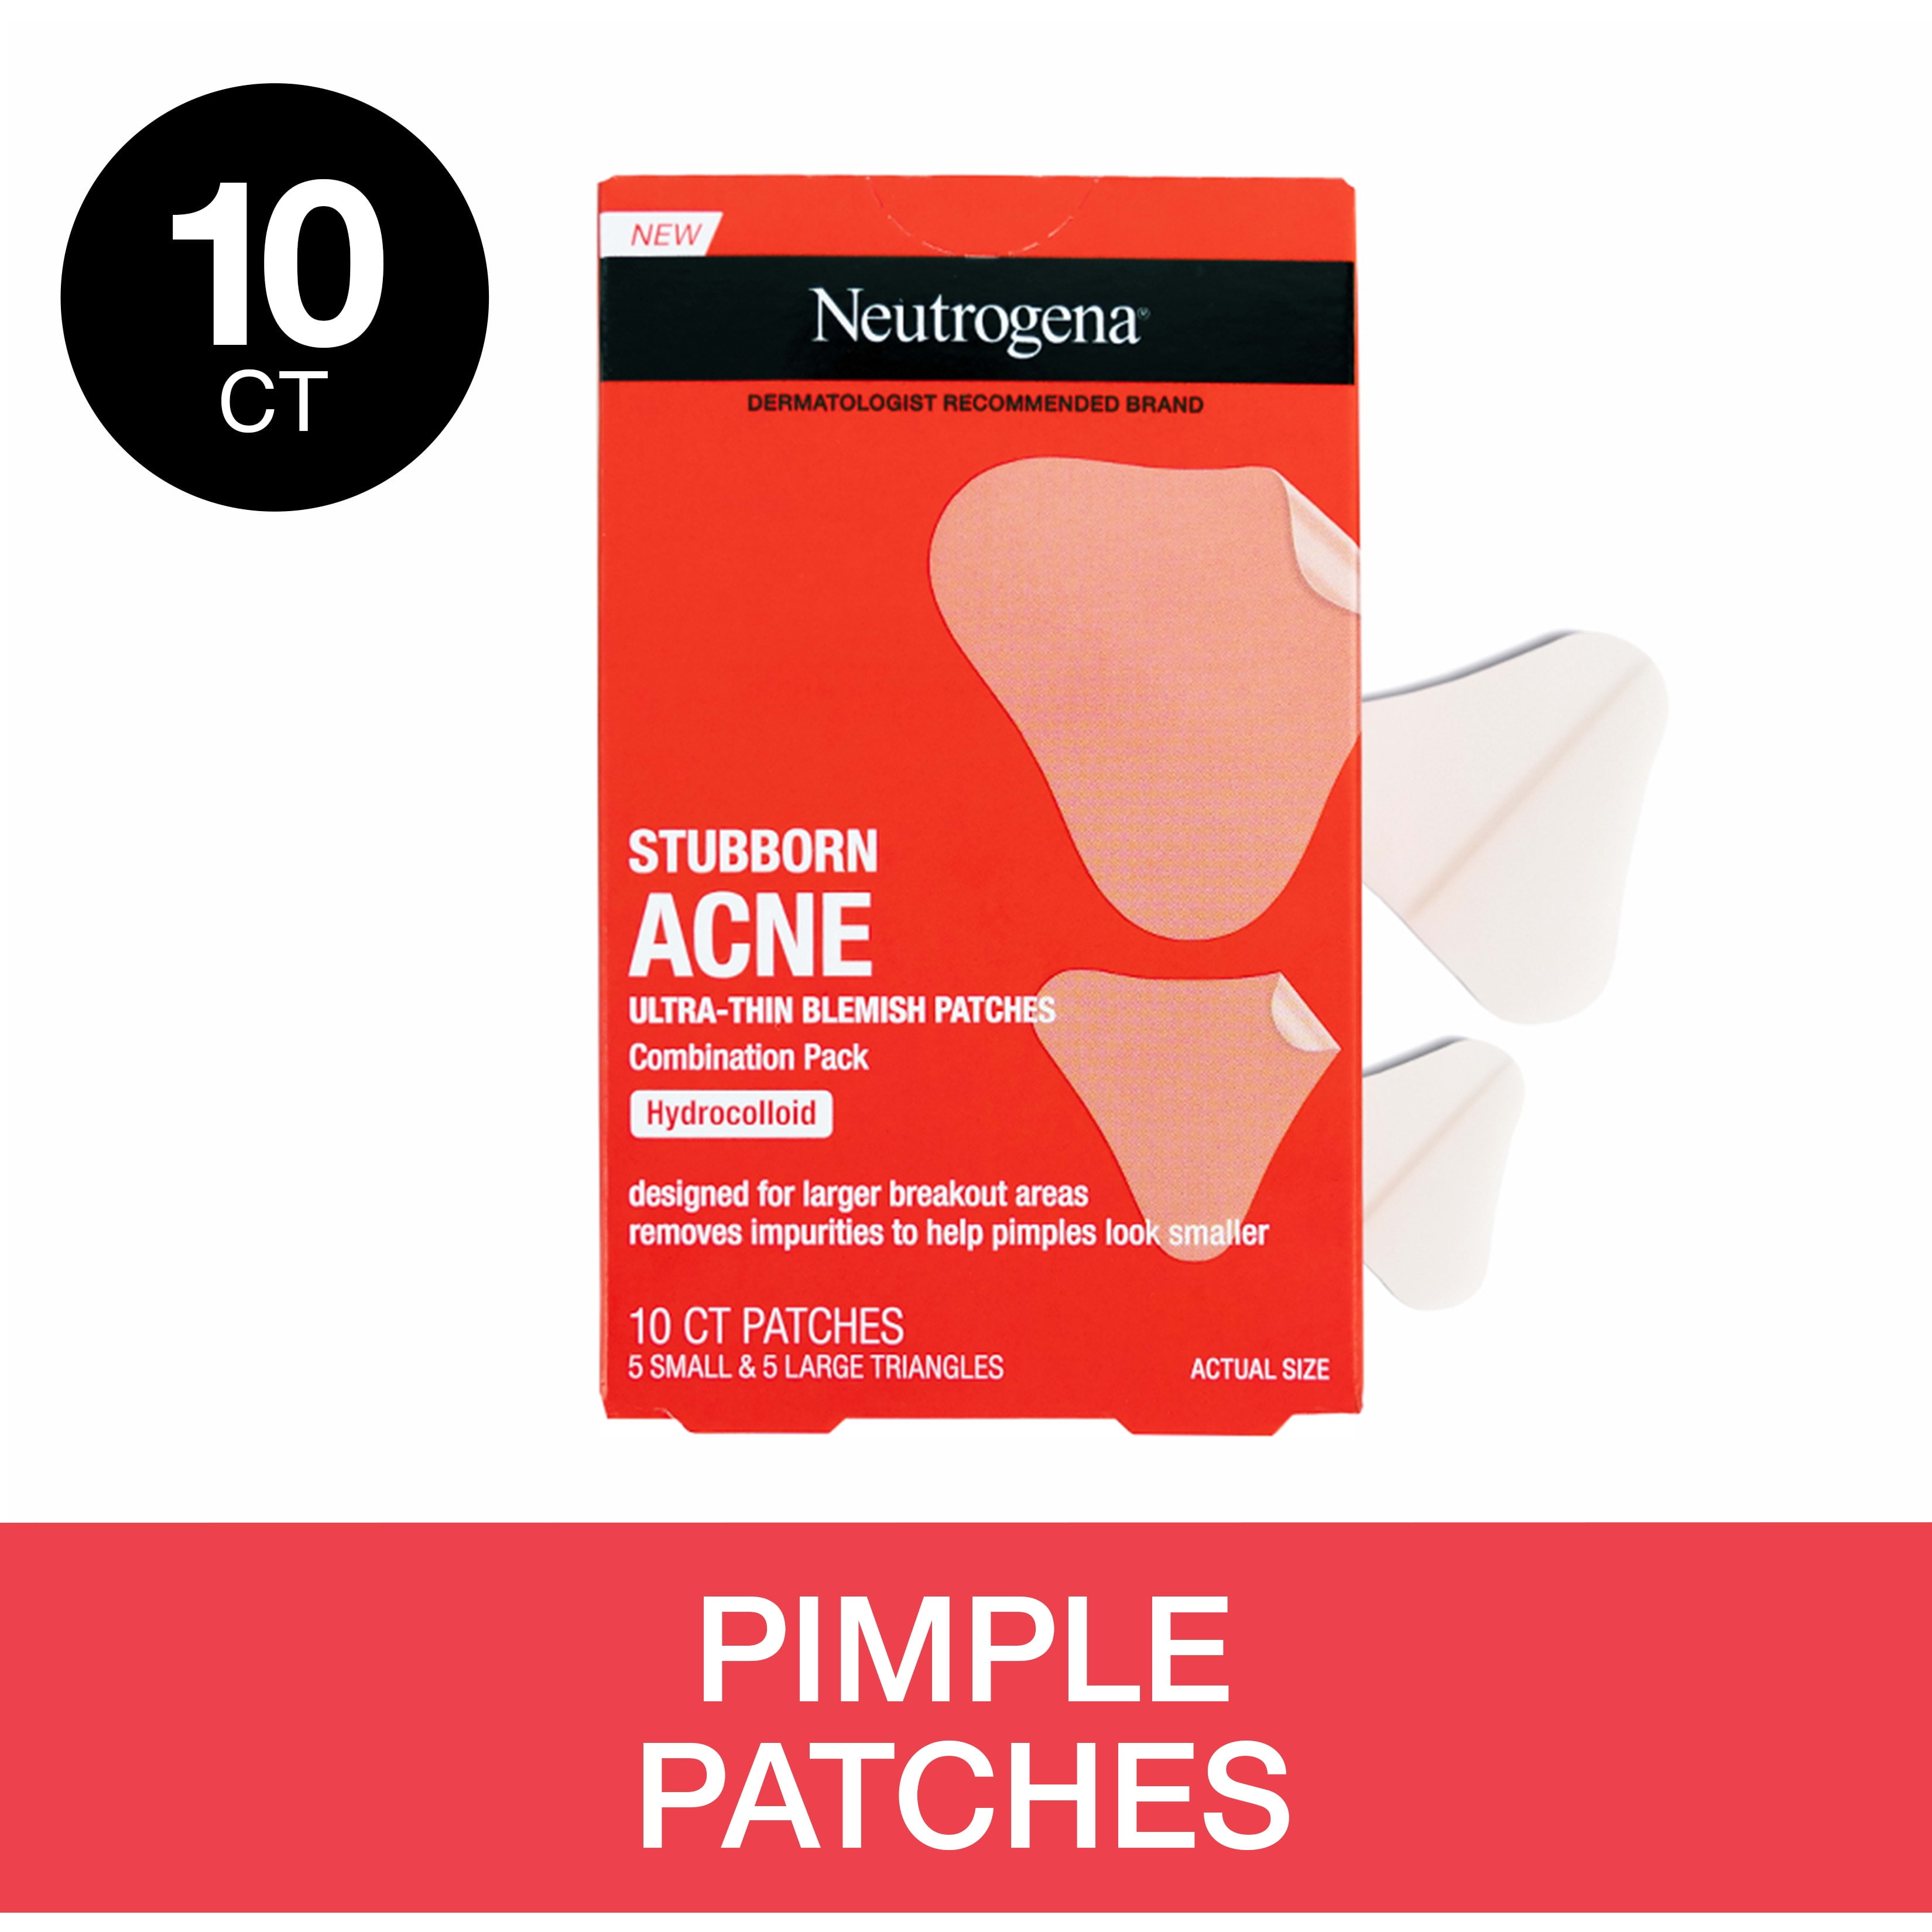 Neutrogena Stubborn Acne Treatment, Blemish Patches, Small and Large, 10 count